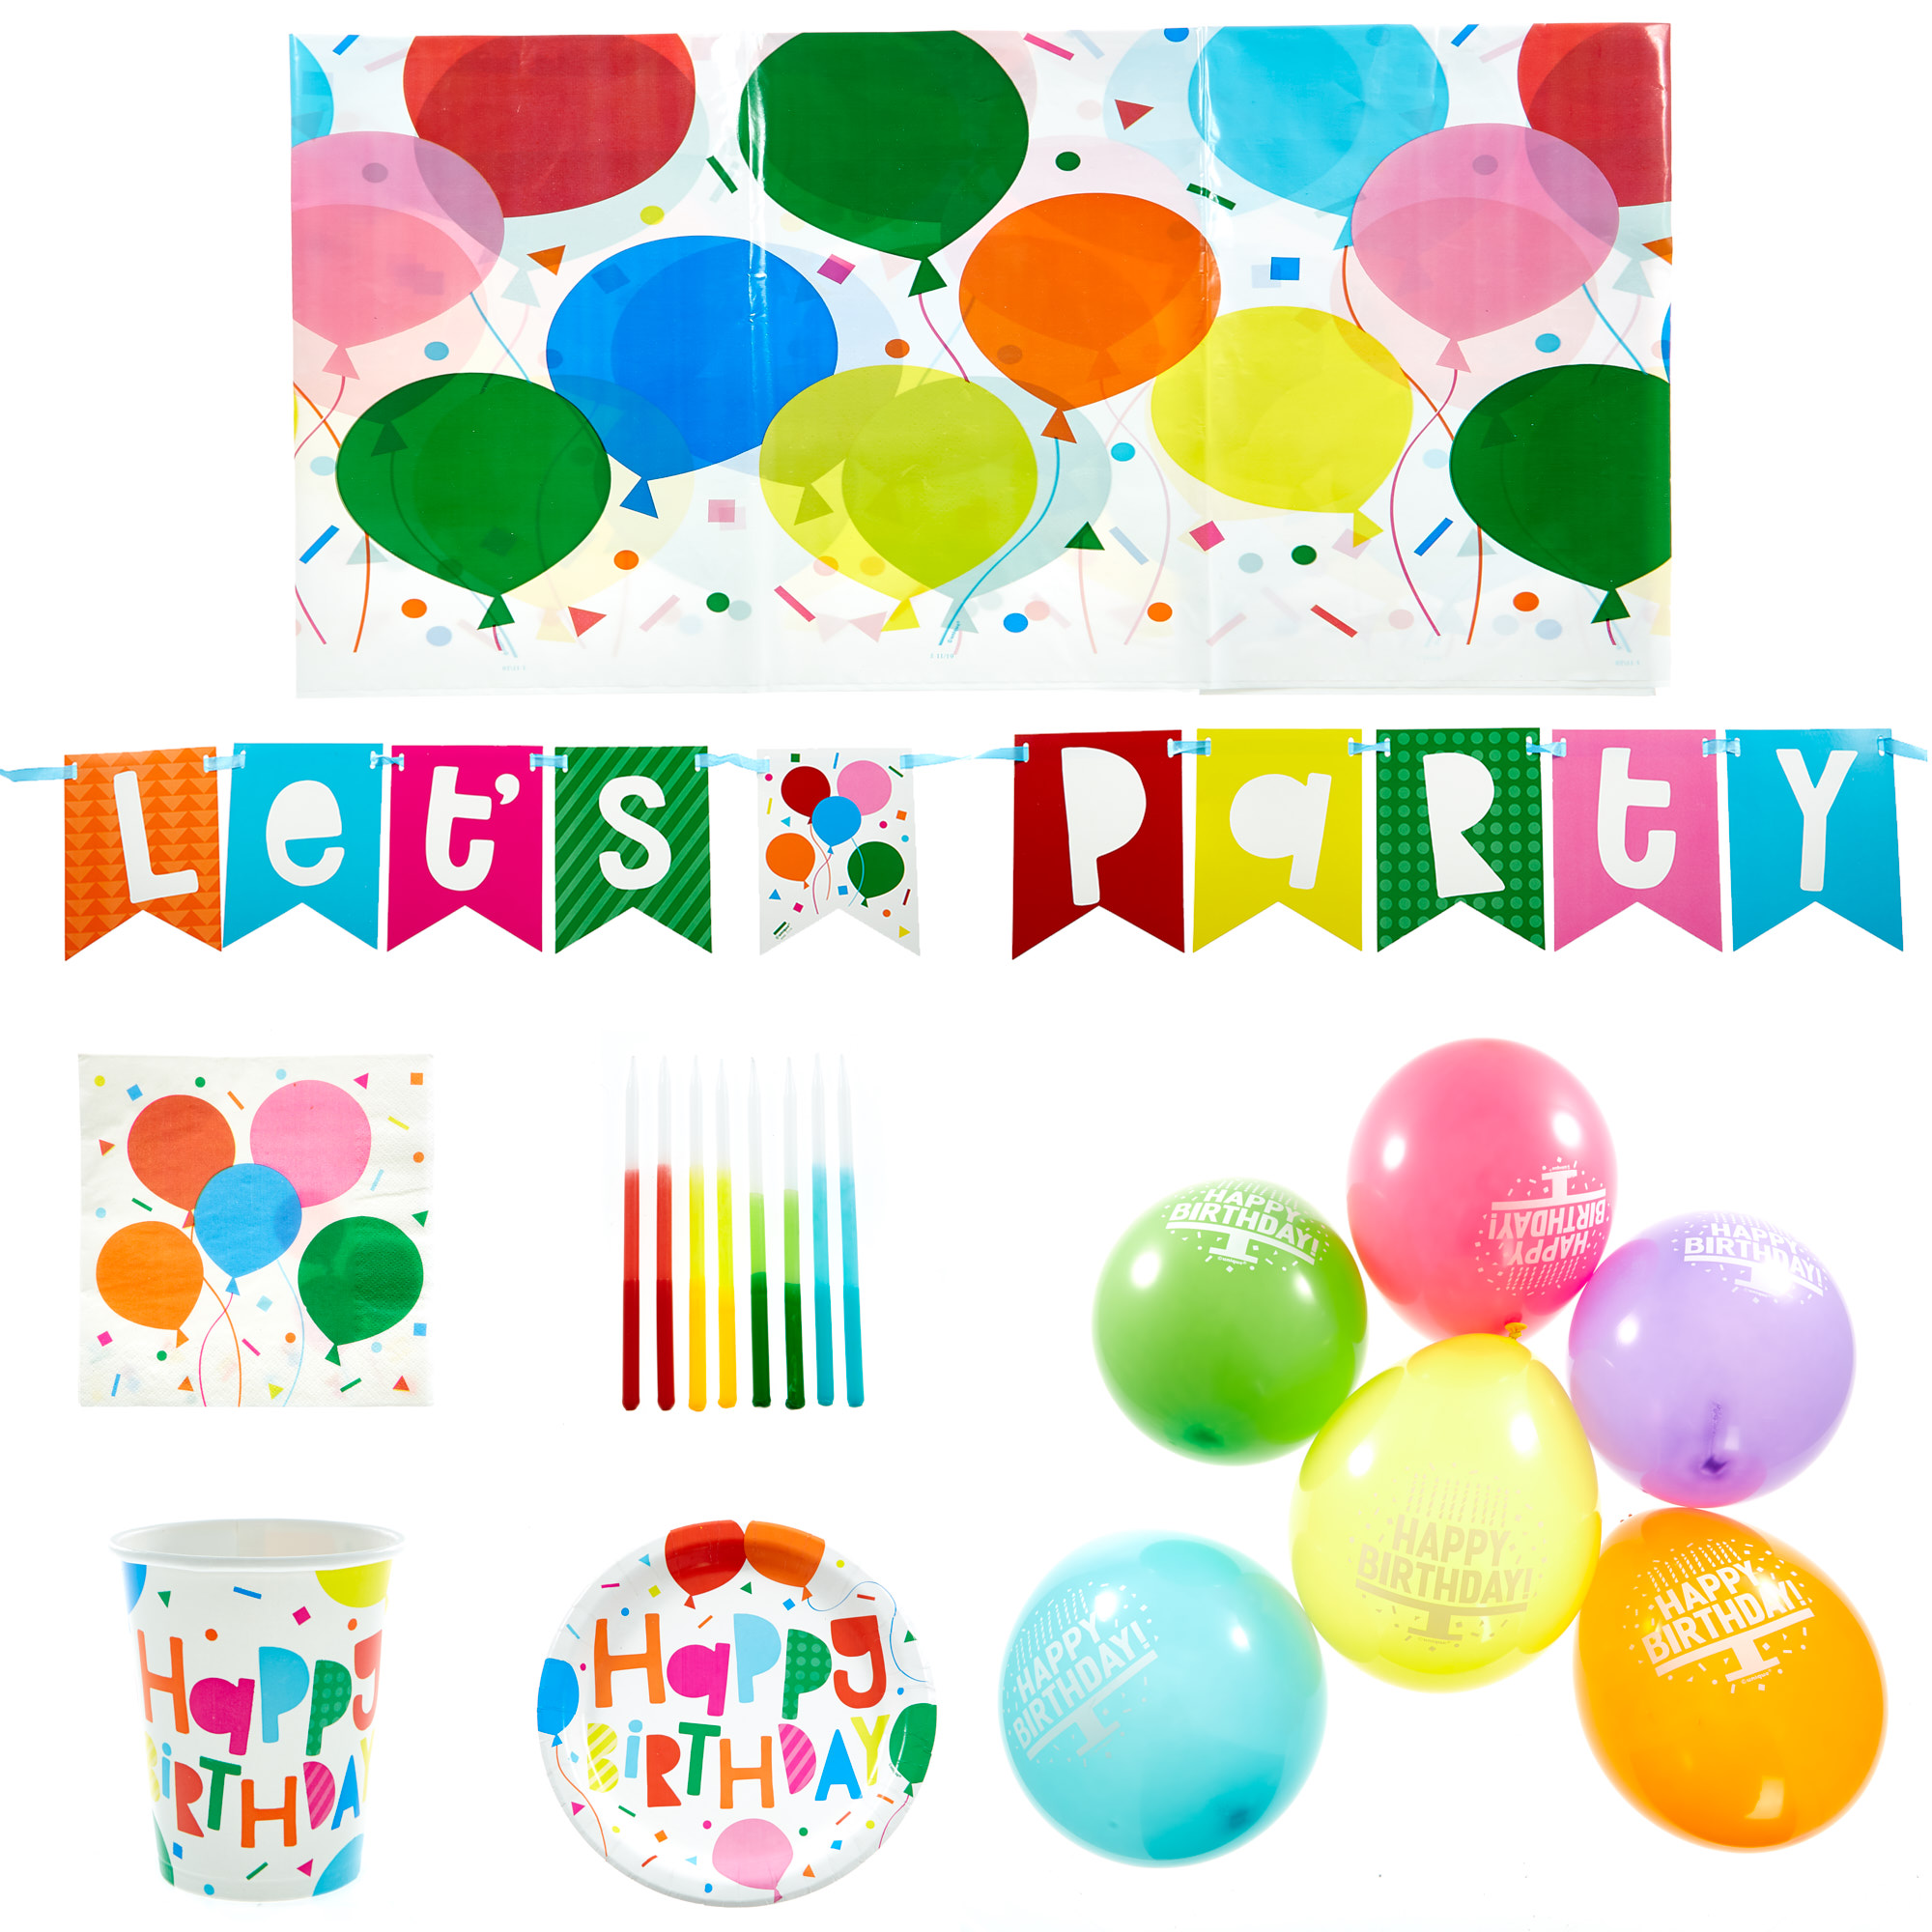 Colourful Birthday Balloons Party Tableware & Decorations Bundle - 8 Guests